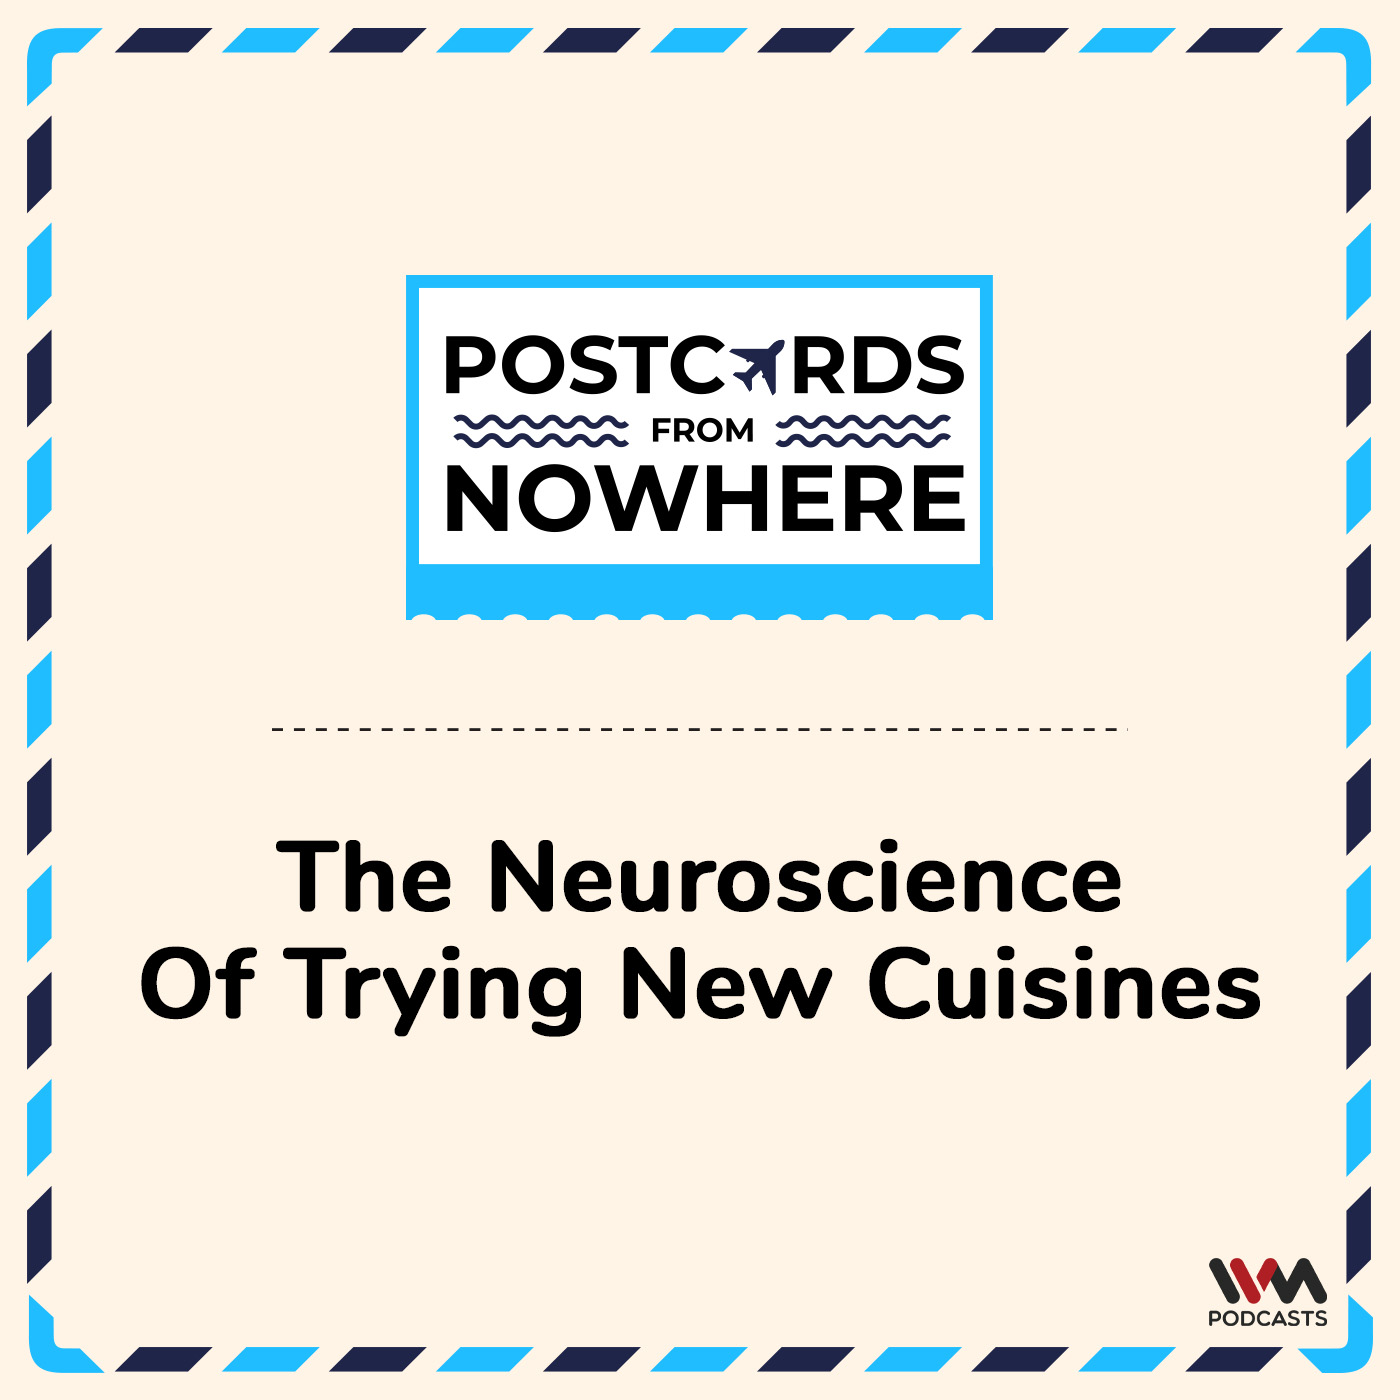 The Neuroscience of Trying New Cuisines